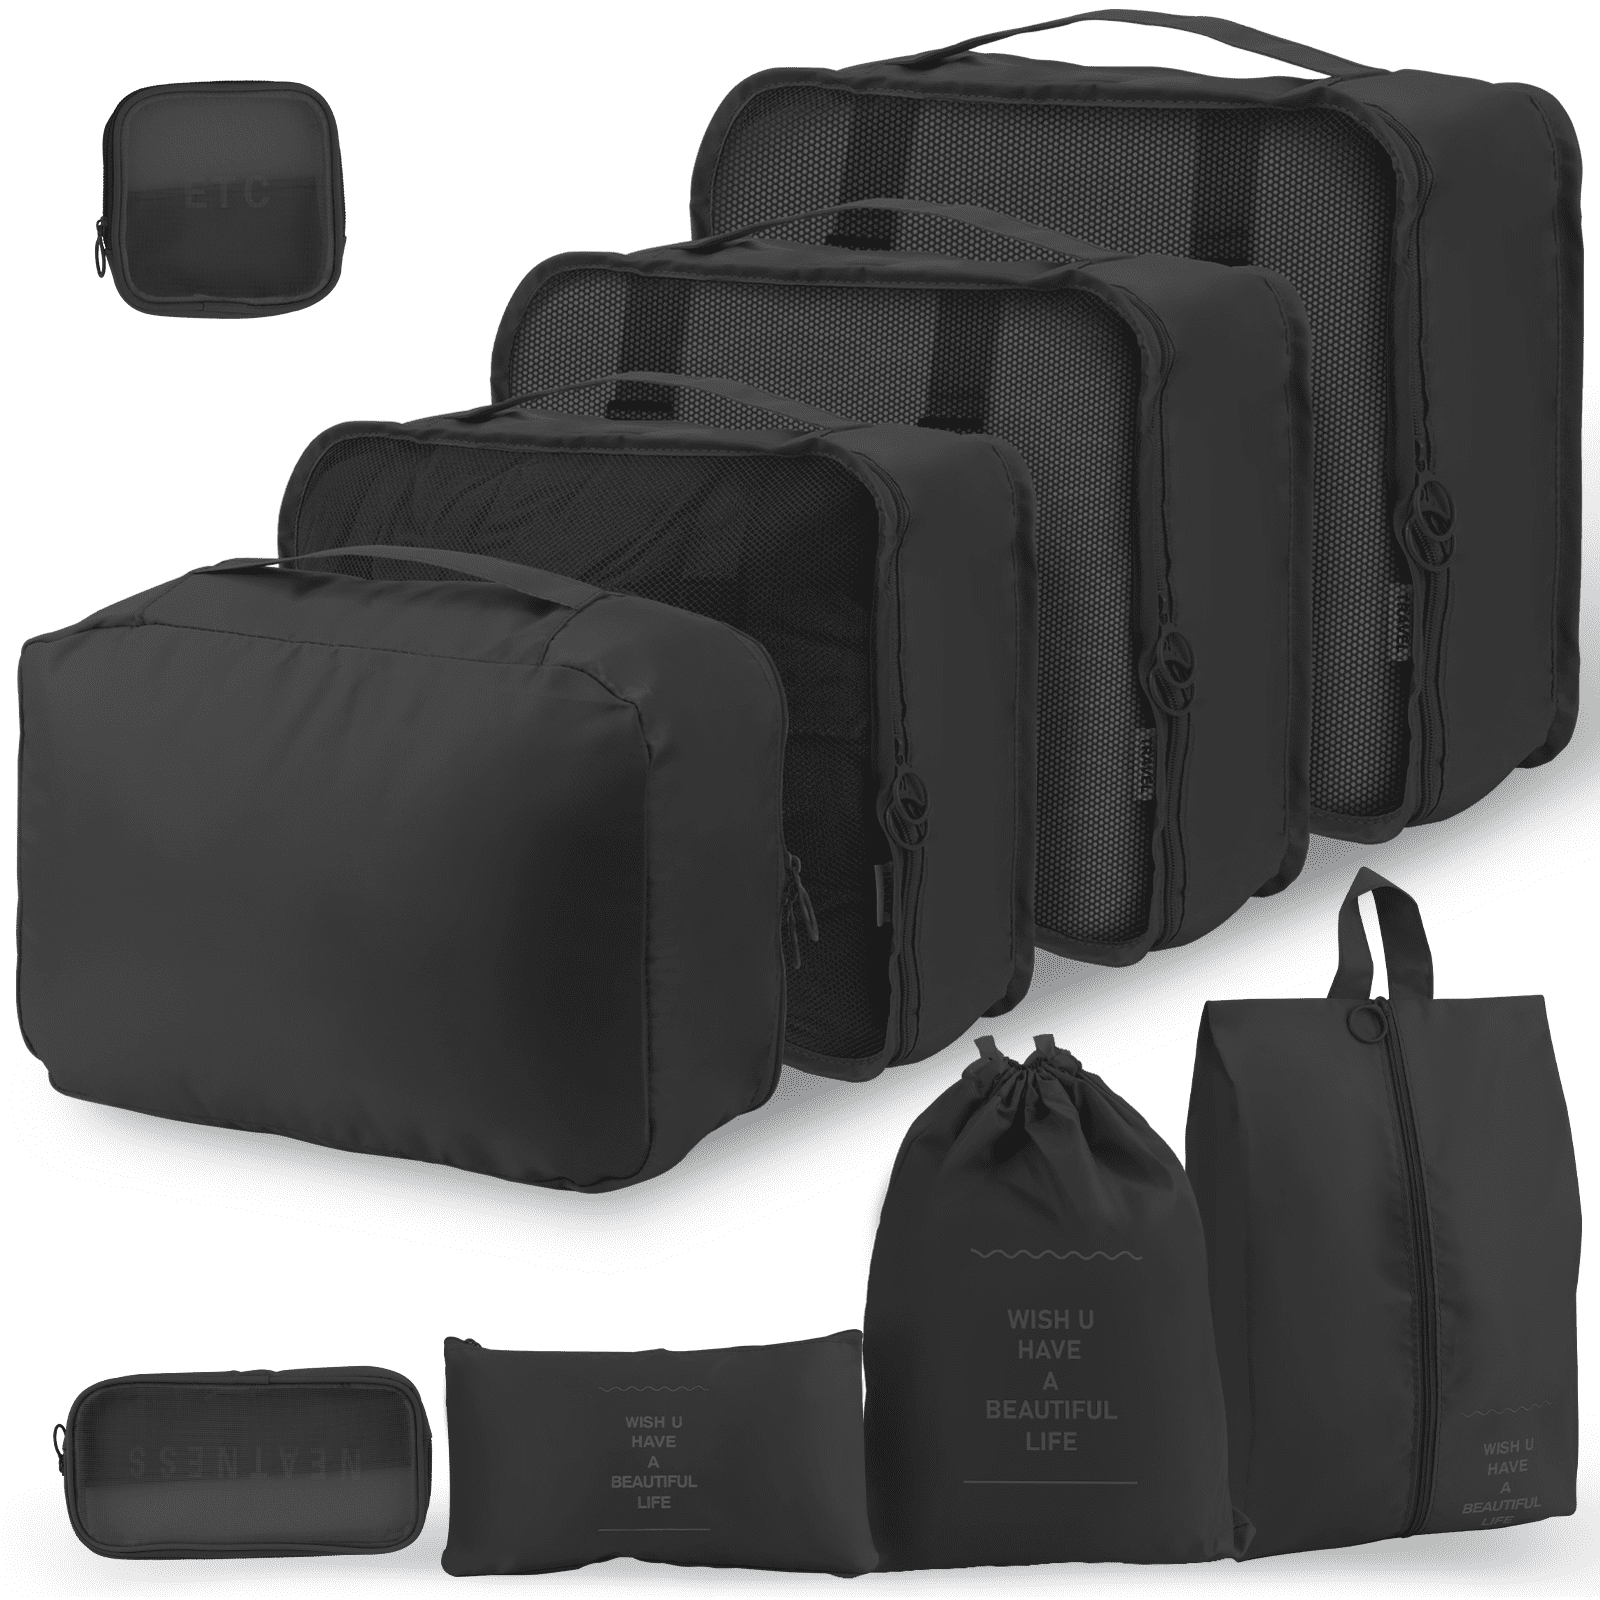 Yamyone 9 PCS Packing Cubes for Travel,Travel Packing Cubes Lightweight  Suitcase Organizer Bags Set Luggage Packing Organizers for Travel  Accessories with Shoes Bags - Grey 